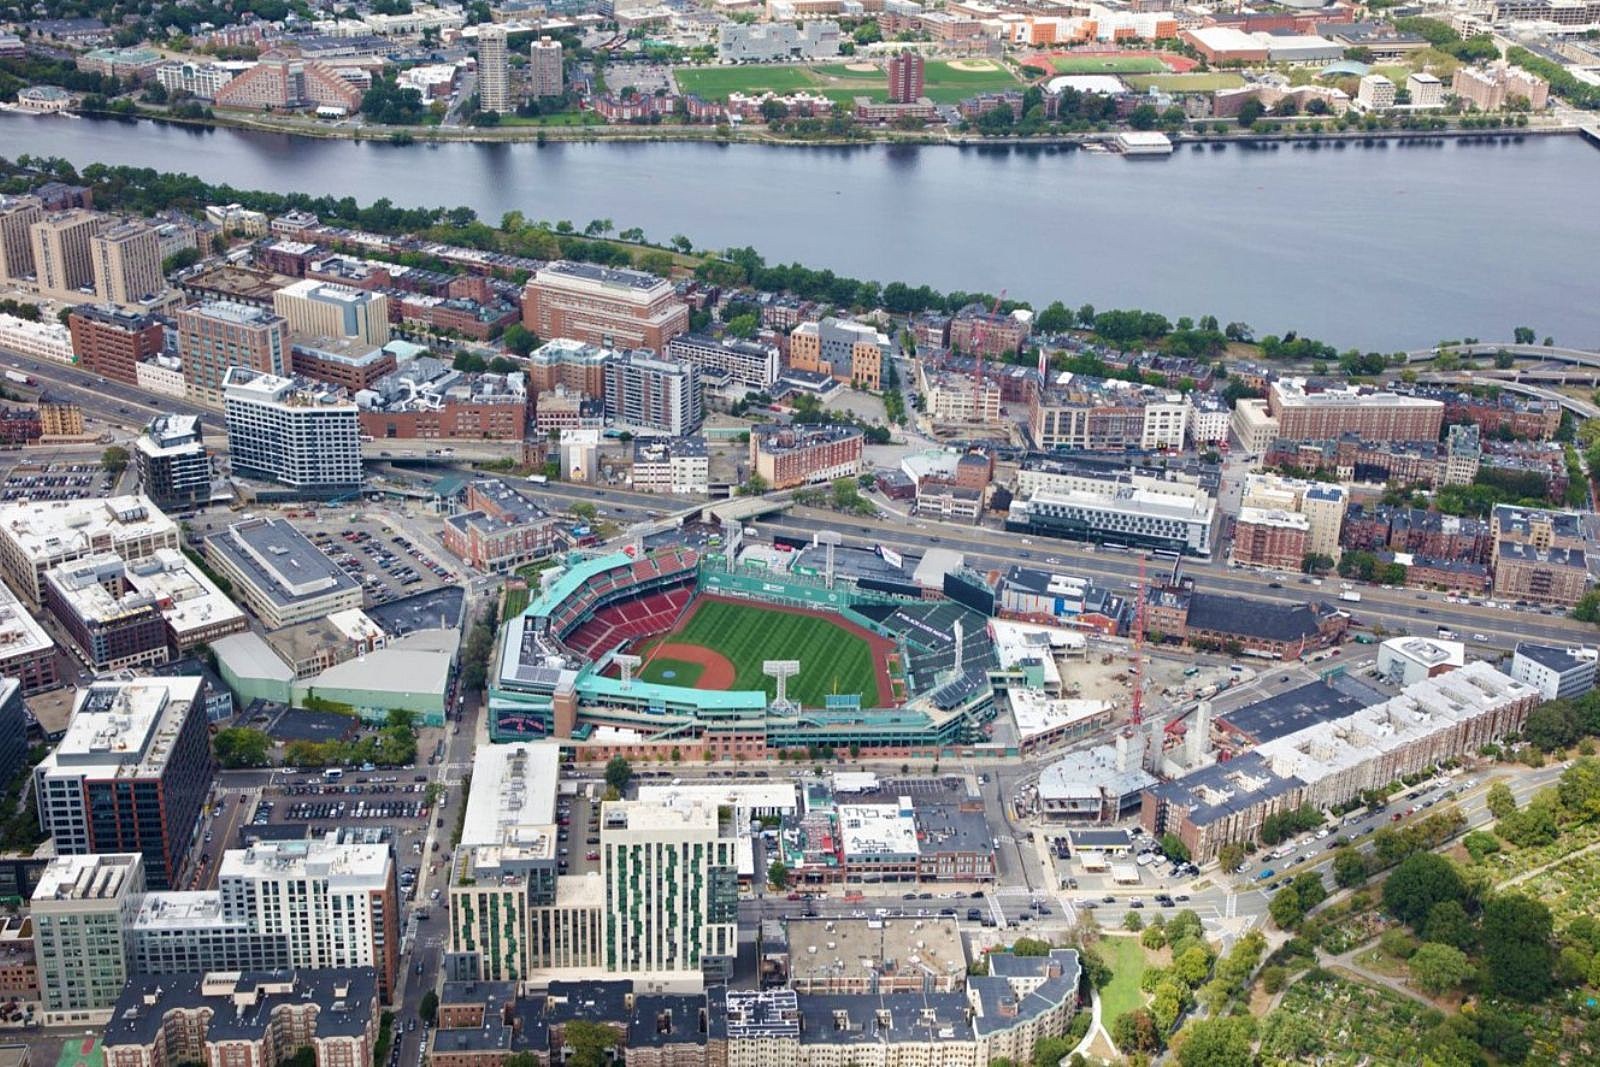 What to know about the Red Sox' development plans around Fenway Park